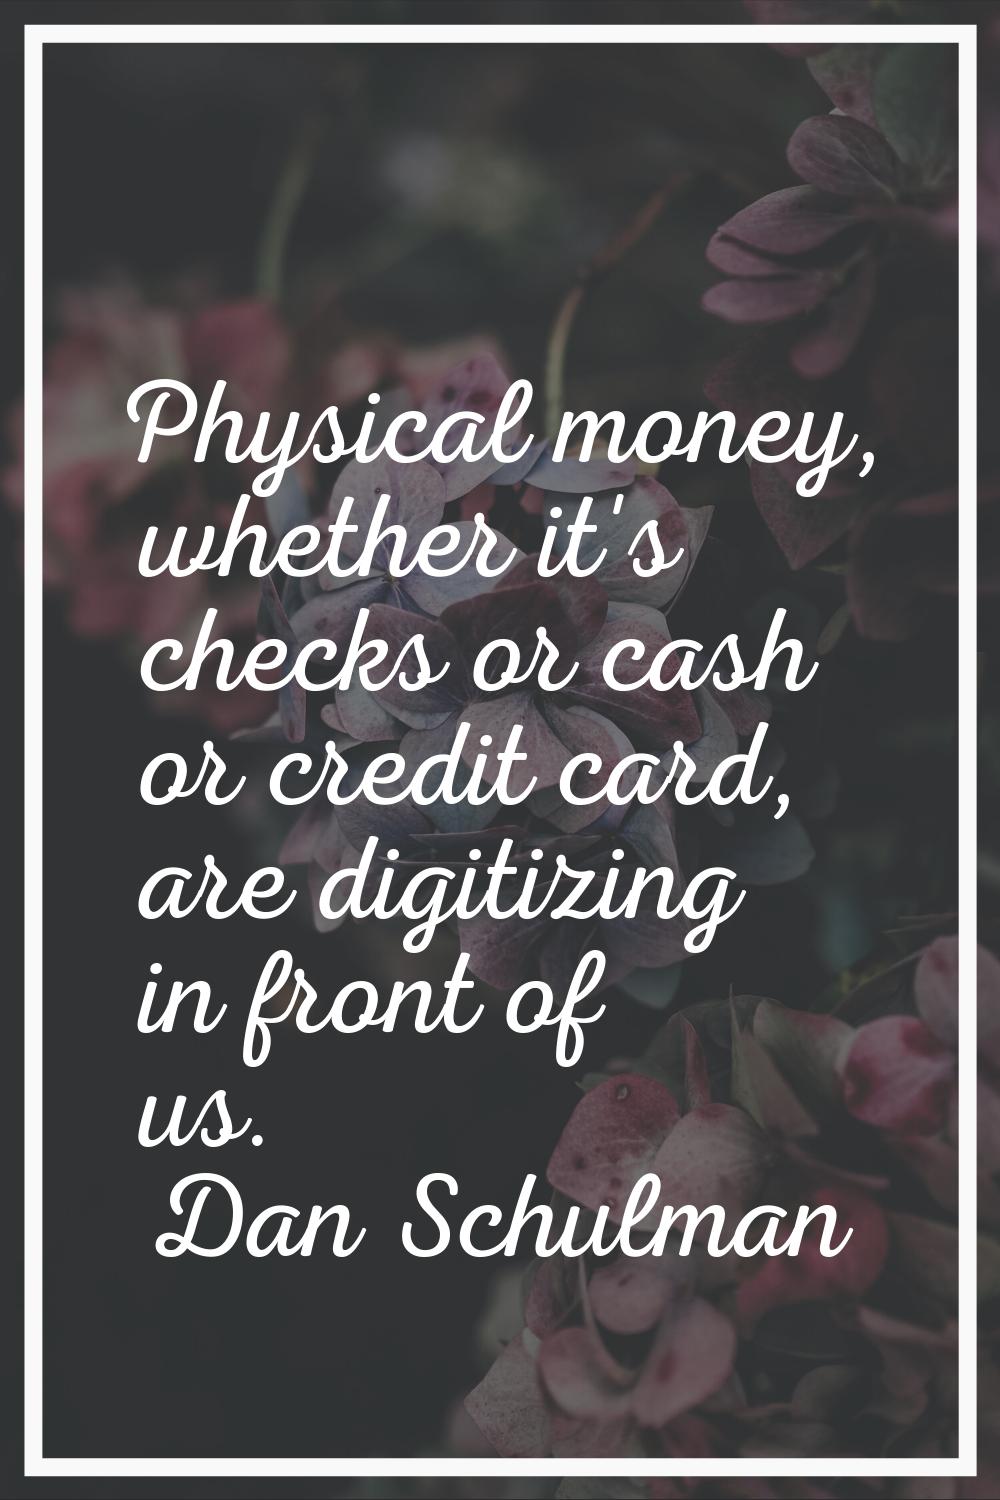 Physical money, whether it's checks or cash or credit card, are digitizing in front of us.